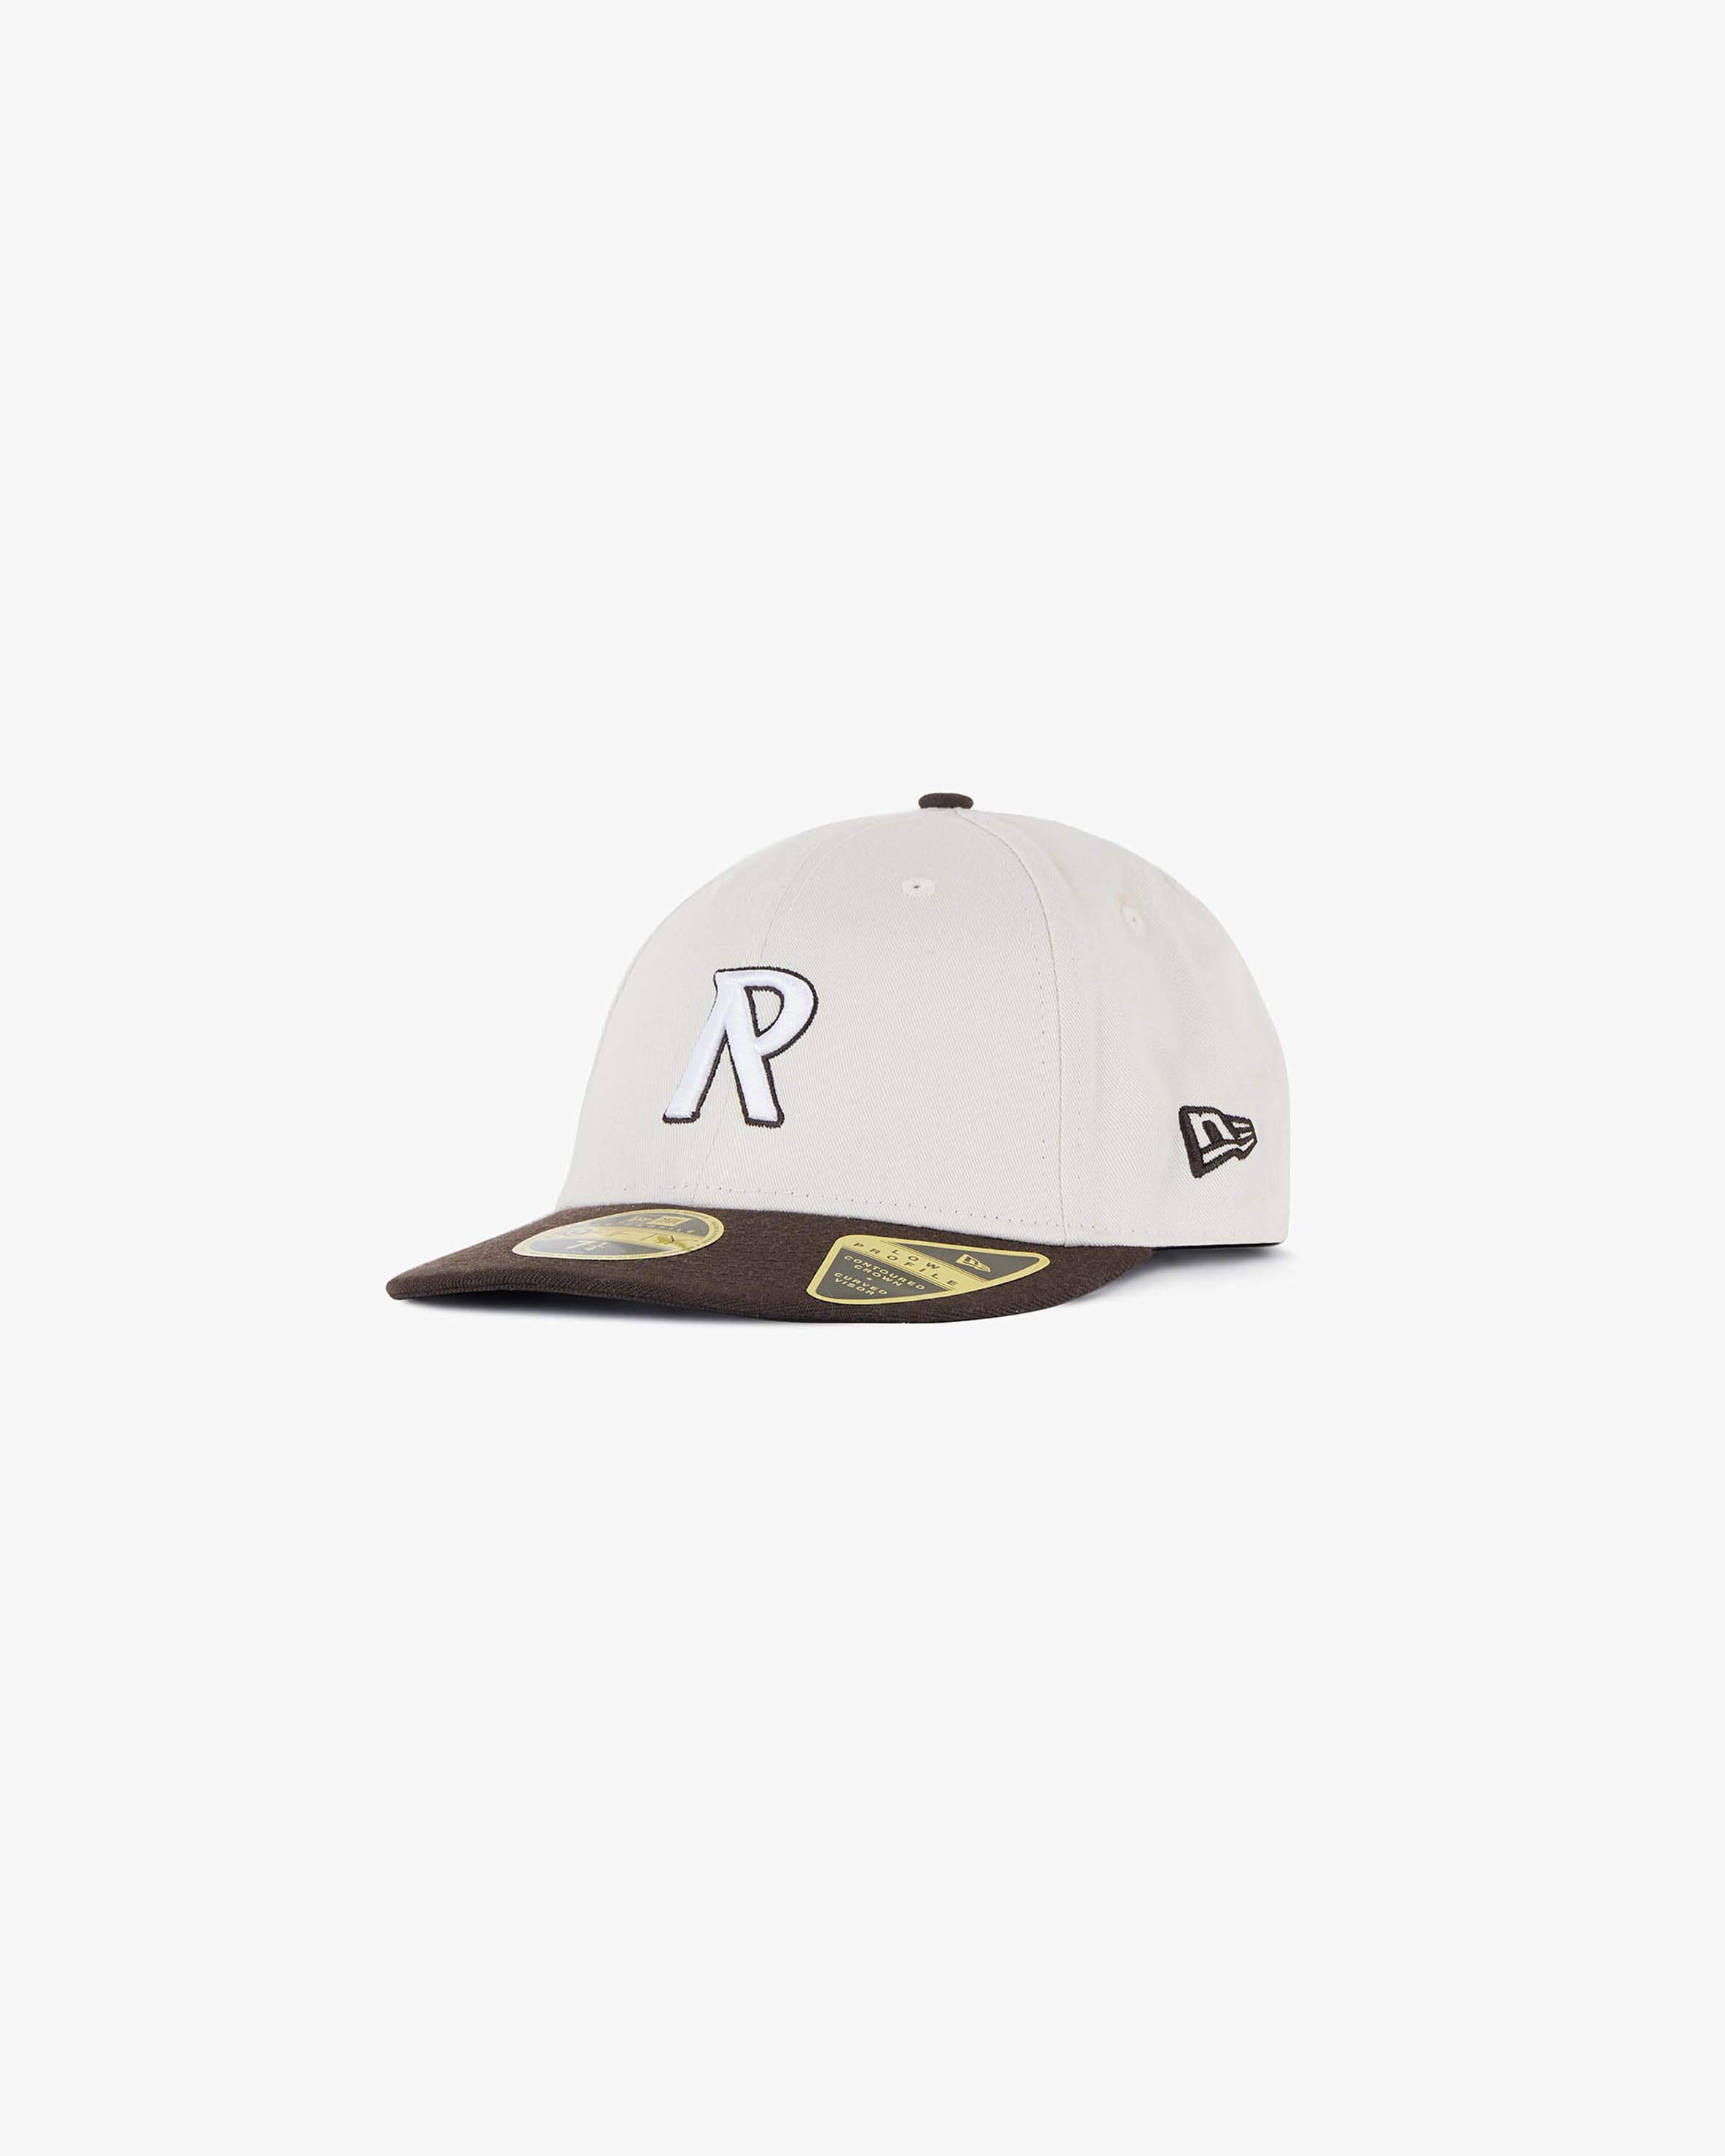 Would you rock an off white fitted? : r/neweracaps